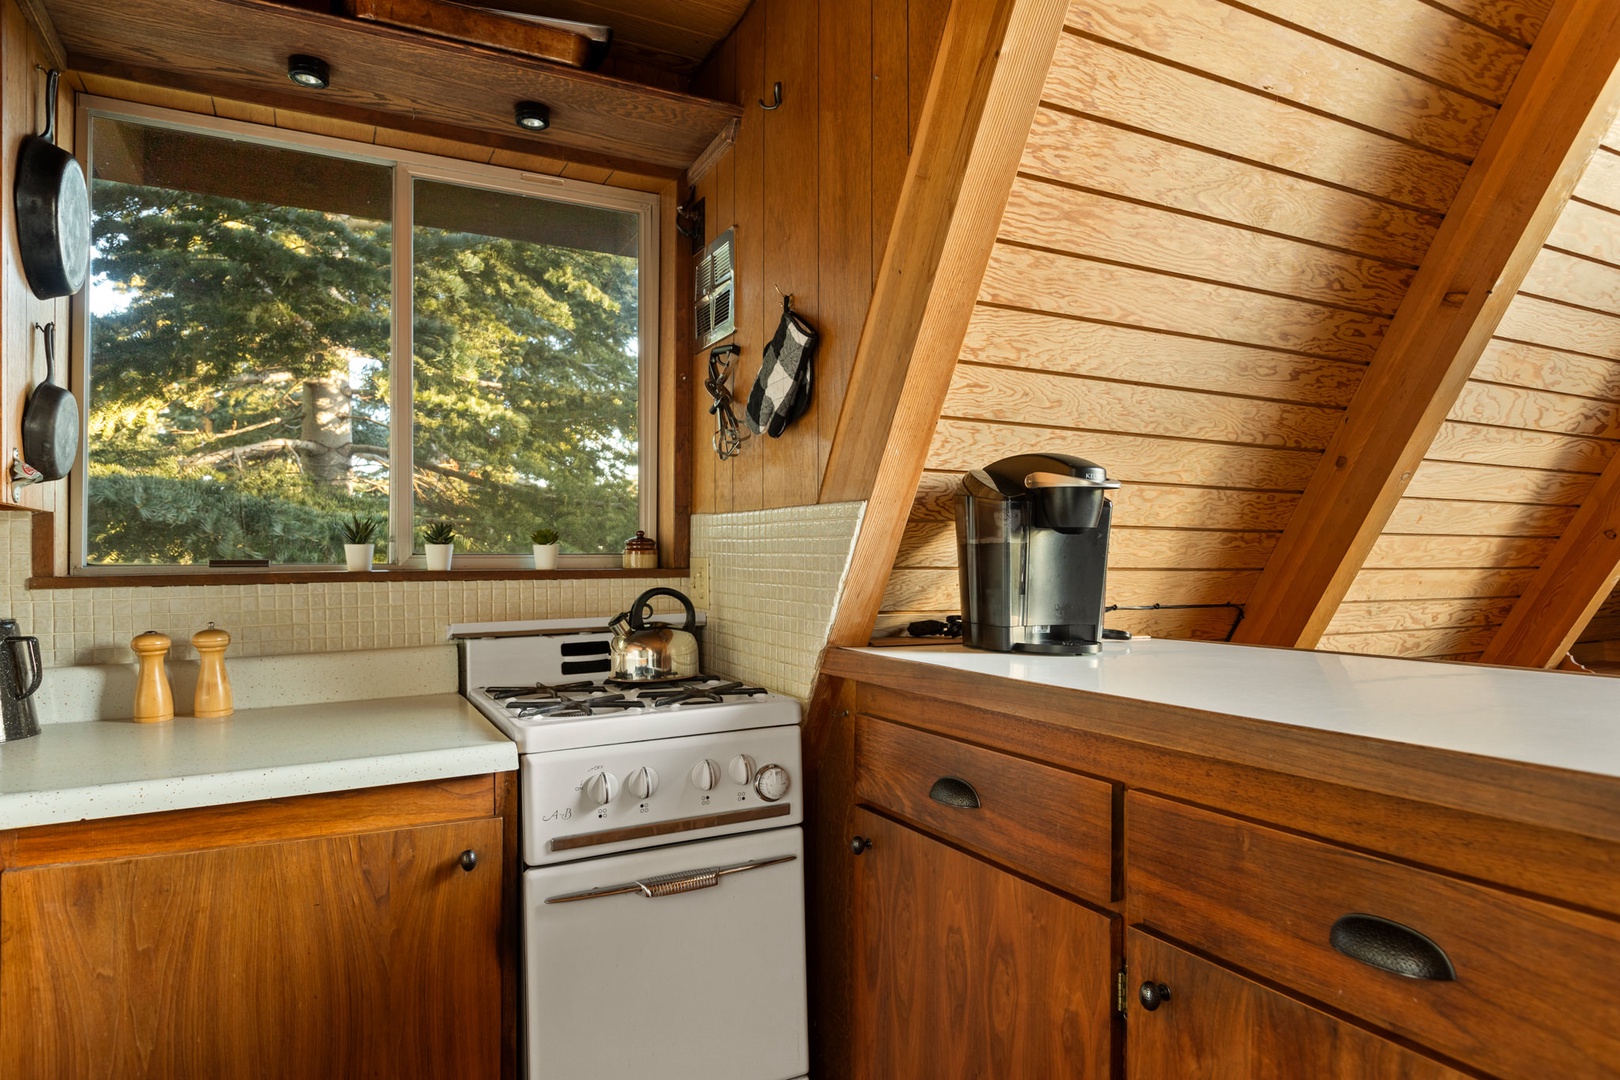 The stove/oven is compact to utilize the small space